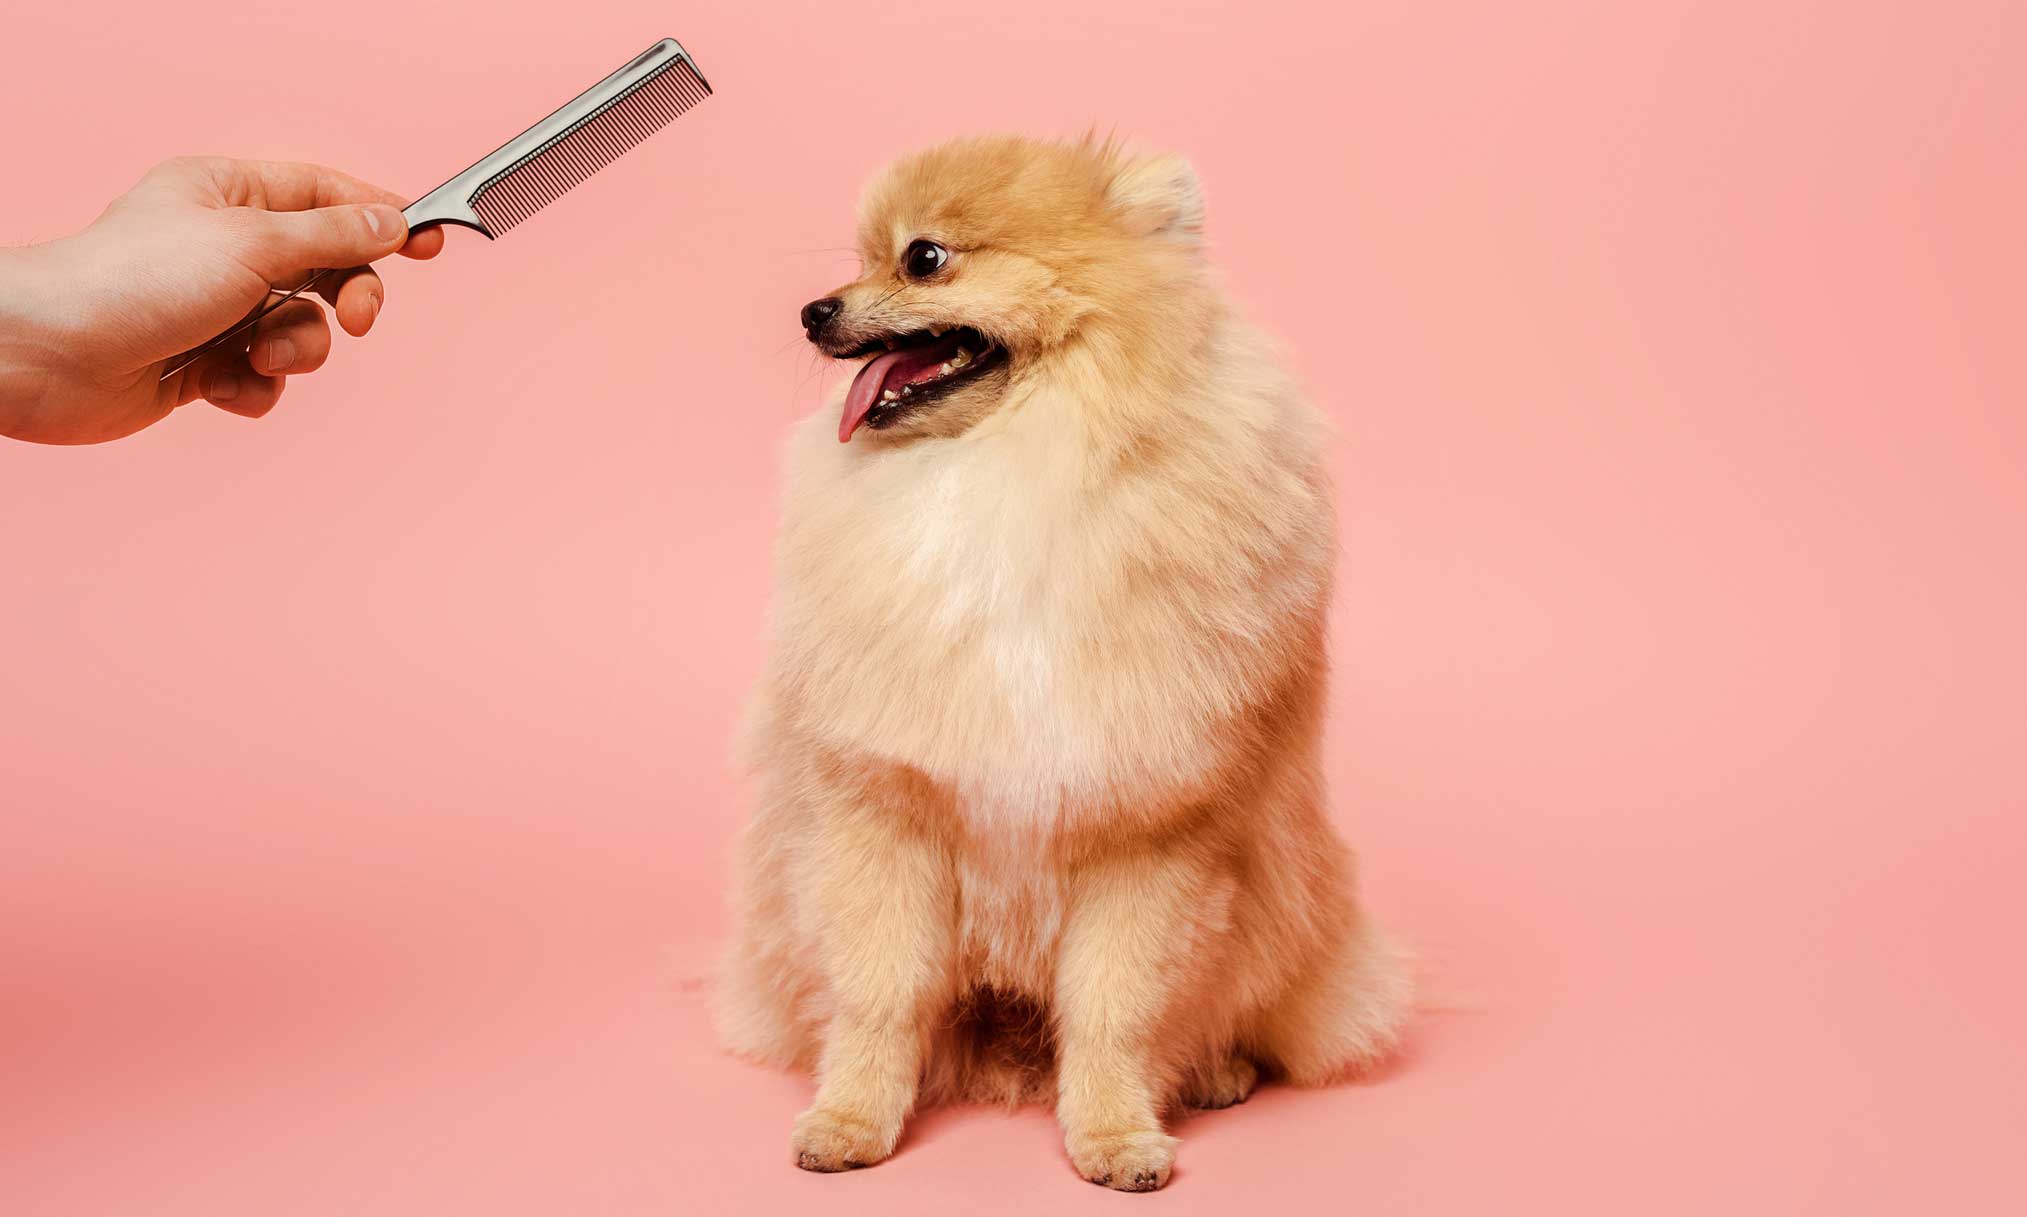 should i shave my dog in summer: dog looking at comb against pink background